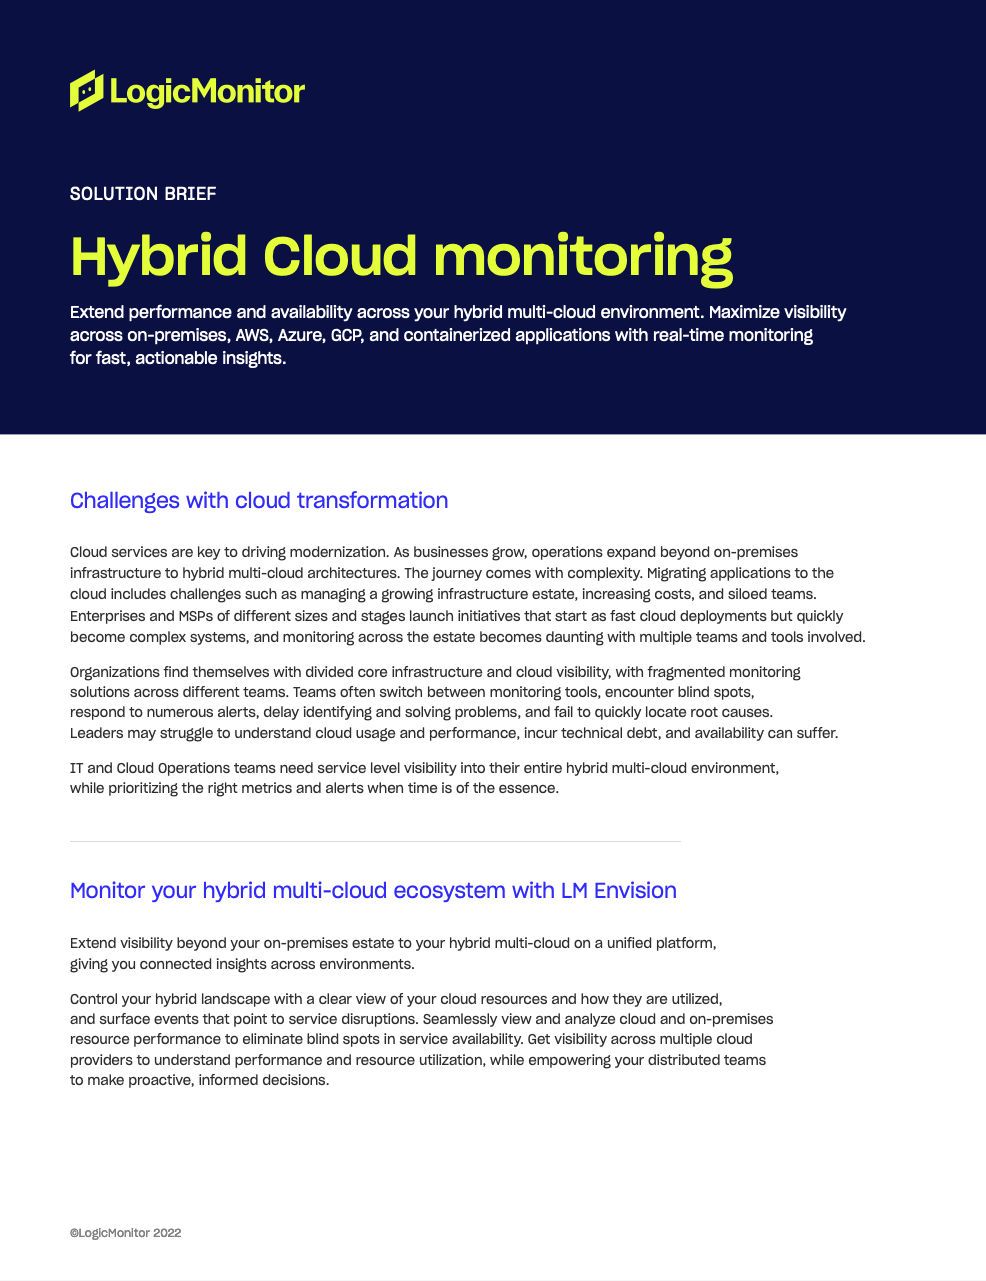 hybrid cloud monitoring solution brief cover